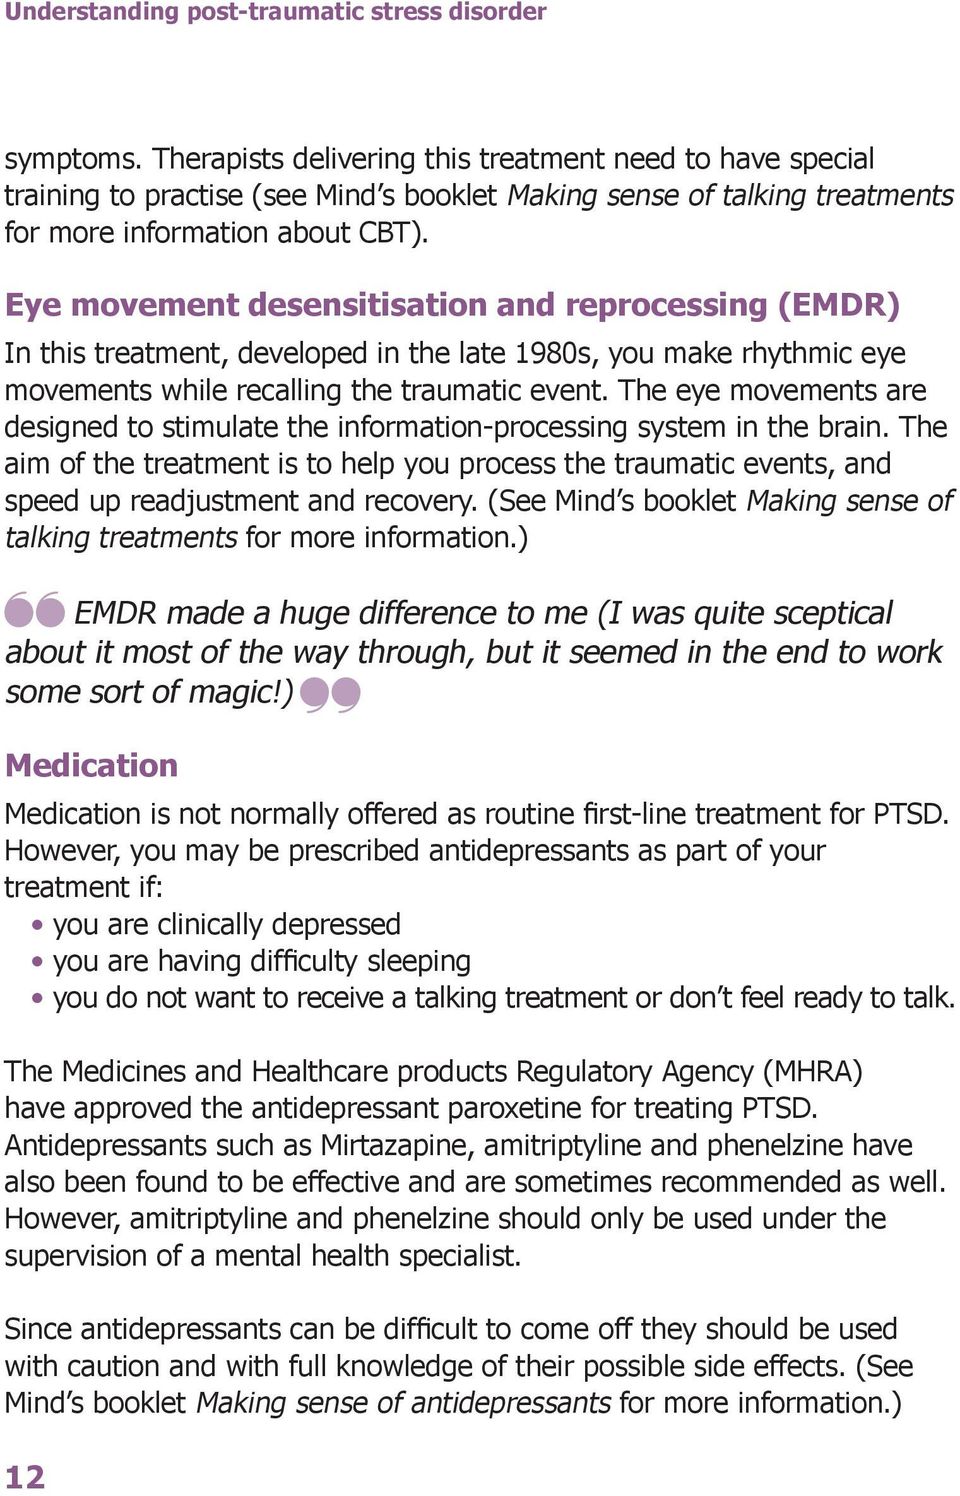 Eye movement desensitisation and reprocessing (EMDR) In this treatment, developed in the late 1980s, you make rhythmic eye movements while recalling the traumatic event.